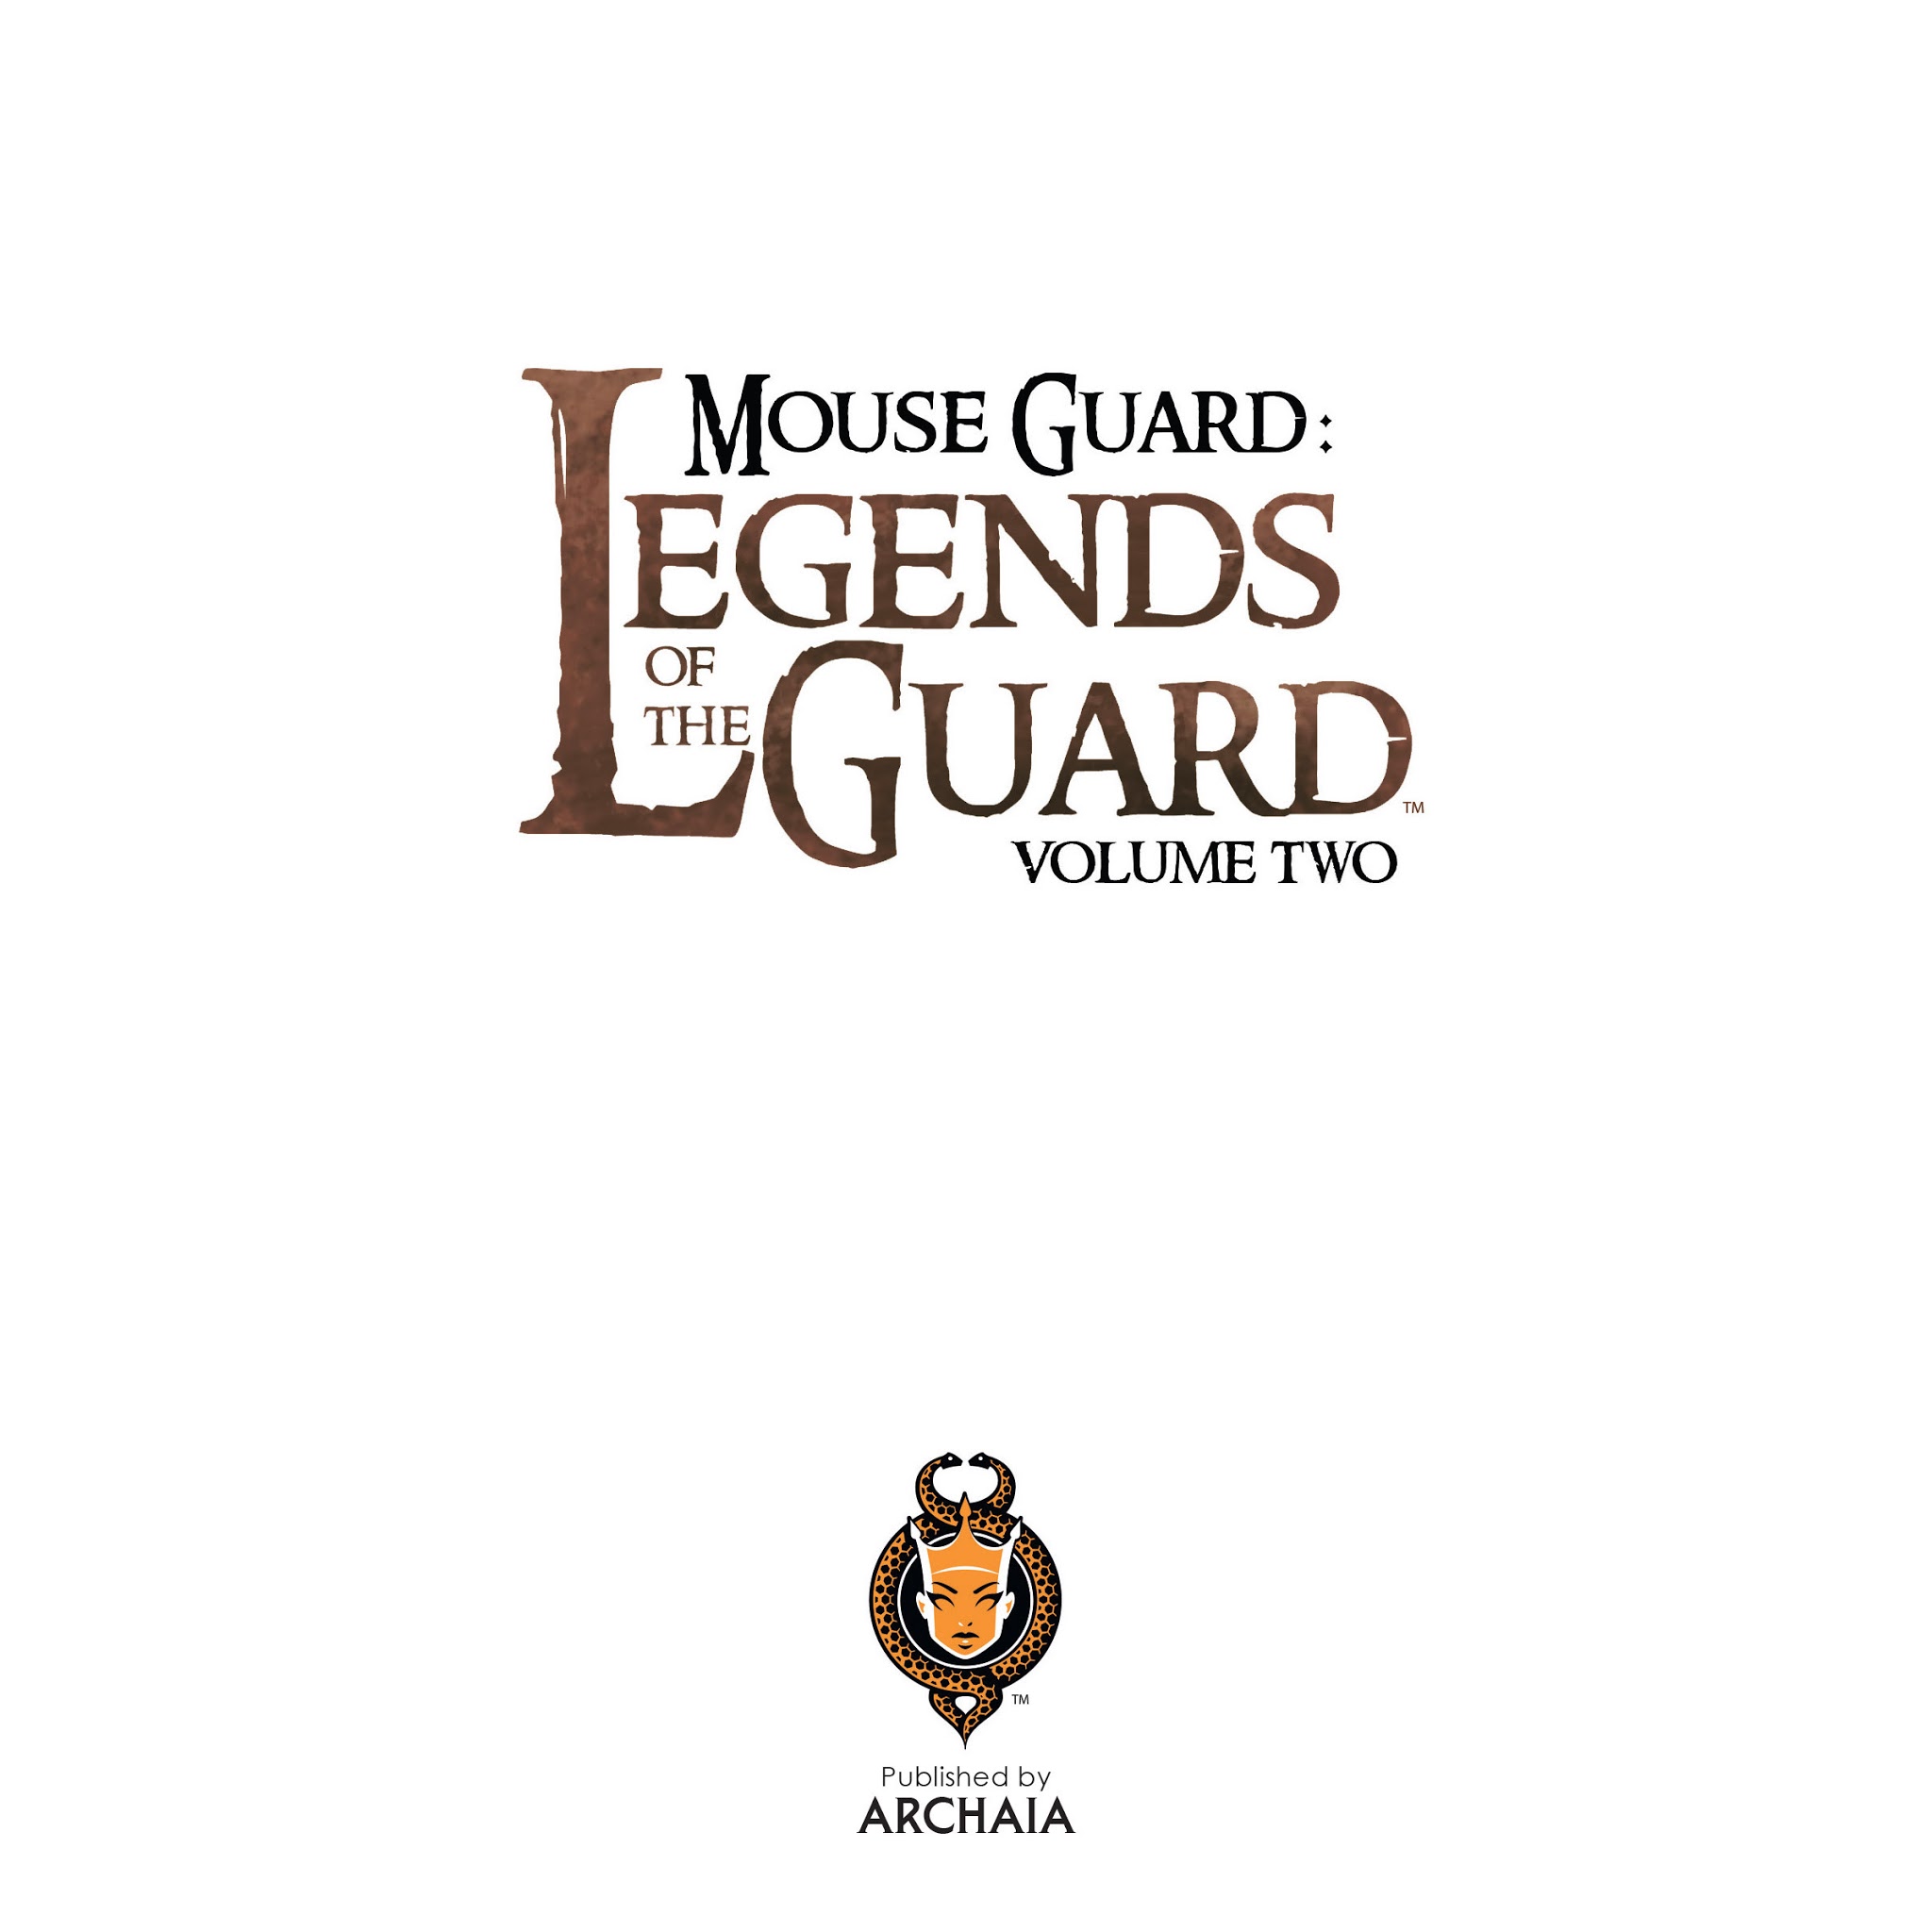 Read online Mouse Guard: Legends of the Guard Volume Two comic -  Issue # TPB - 4